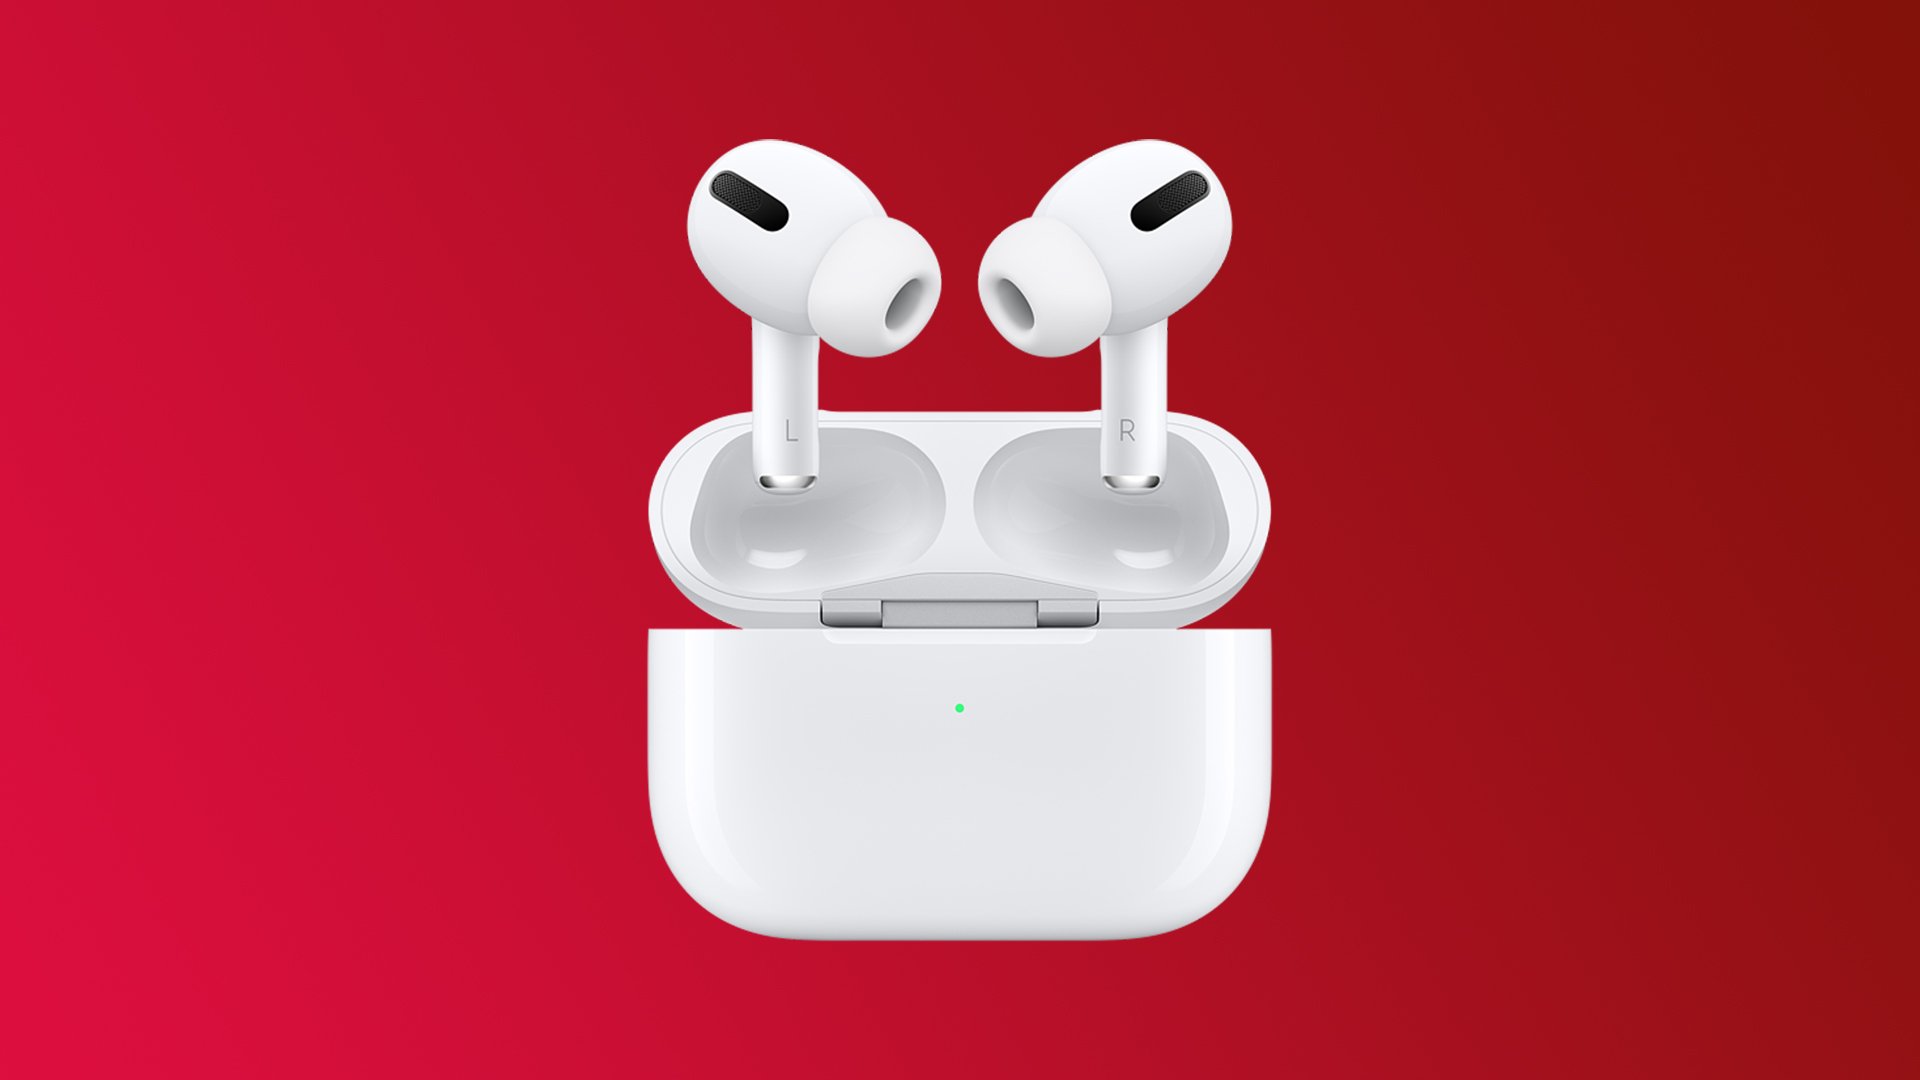 Сигналы airpods. Apple AIRPODS 2. Apple AIRPODS Pro 3. AIRPODS Pro 2. Наушники Air pods Pro 2.